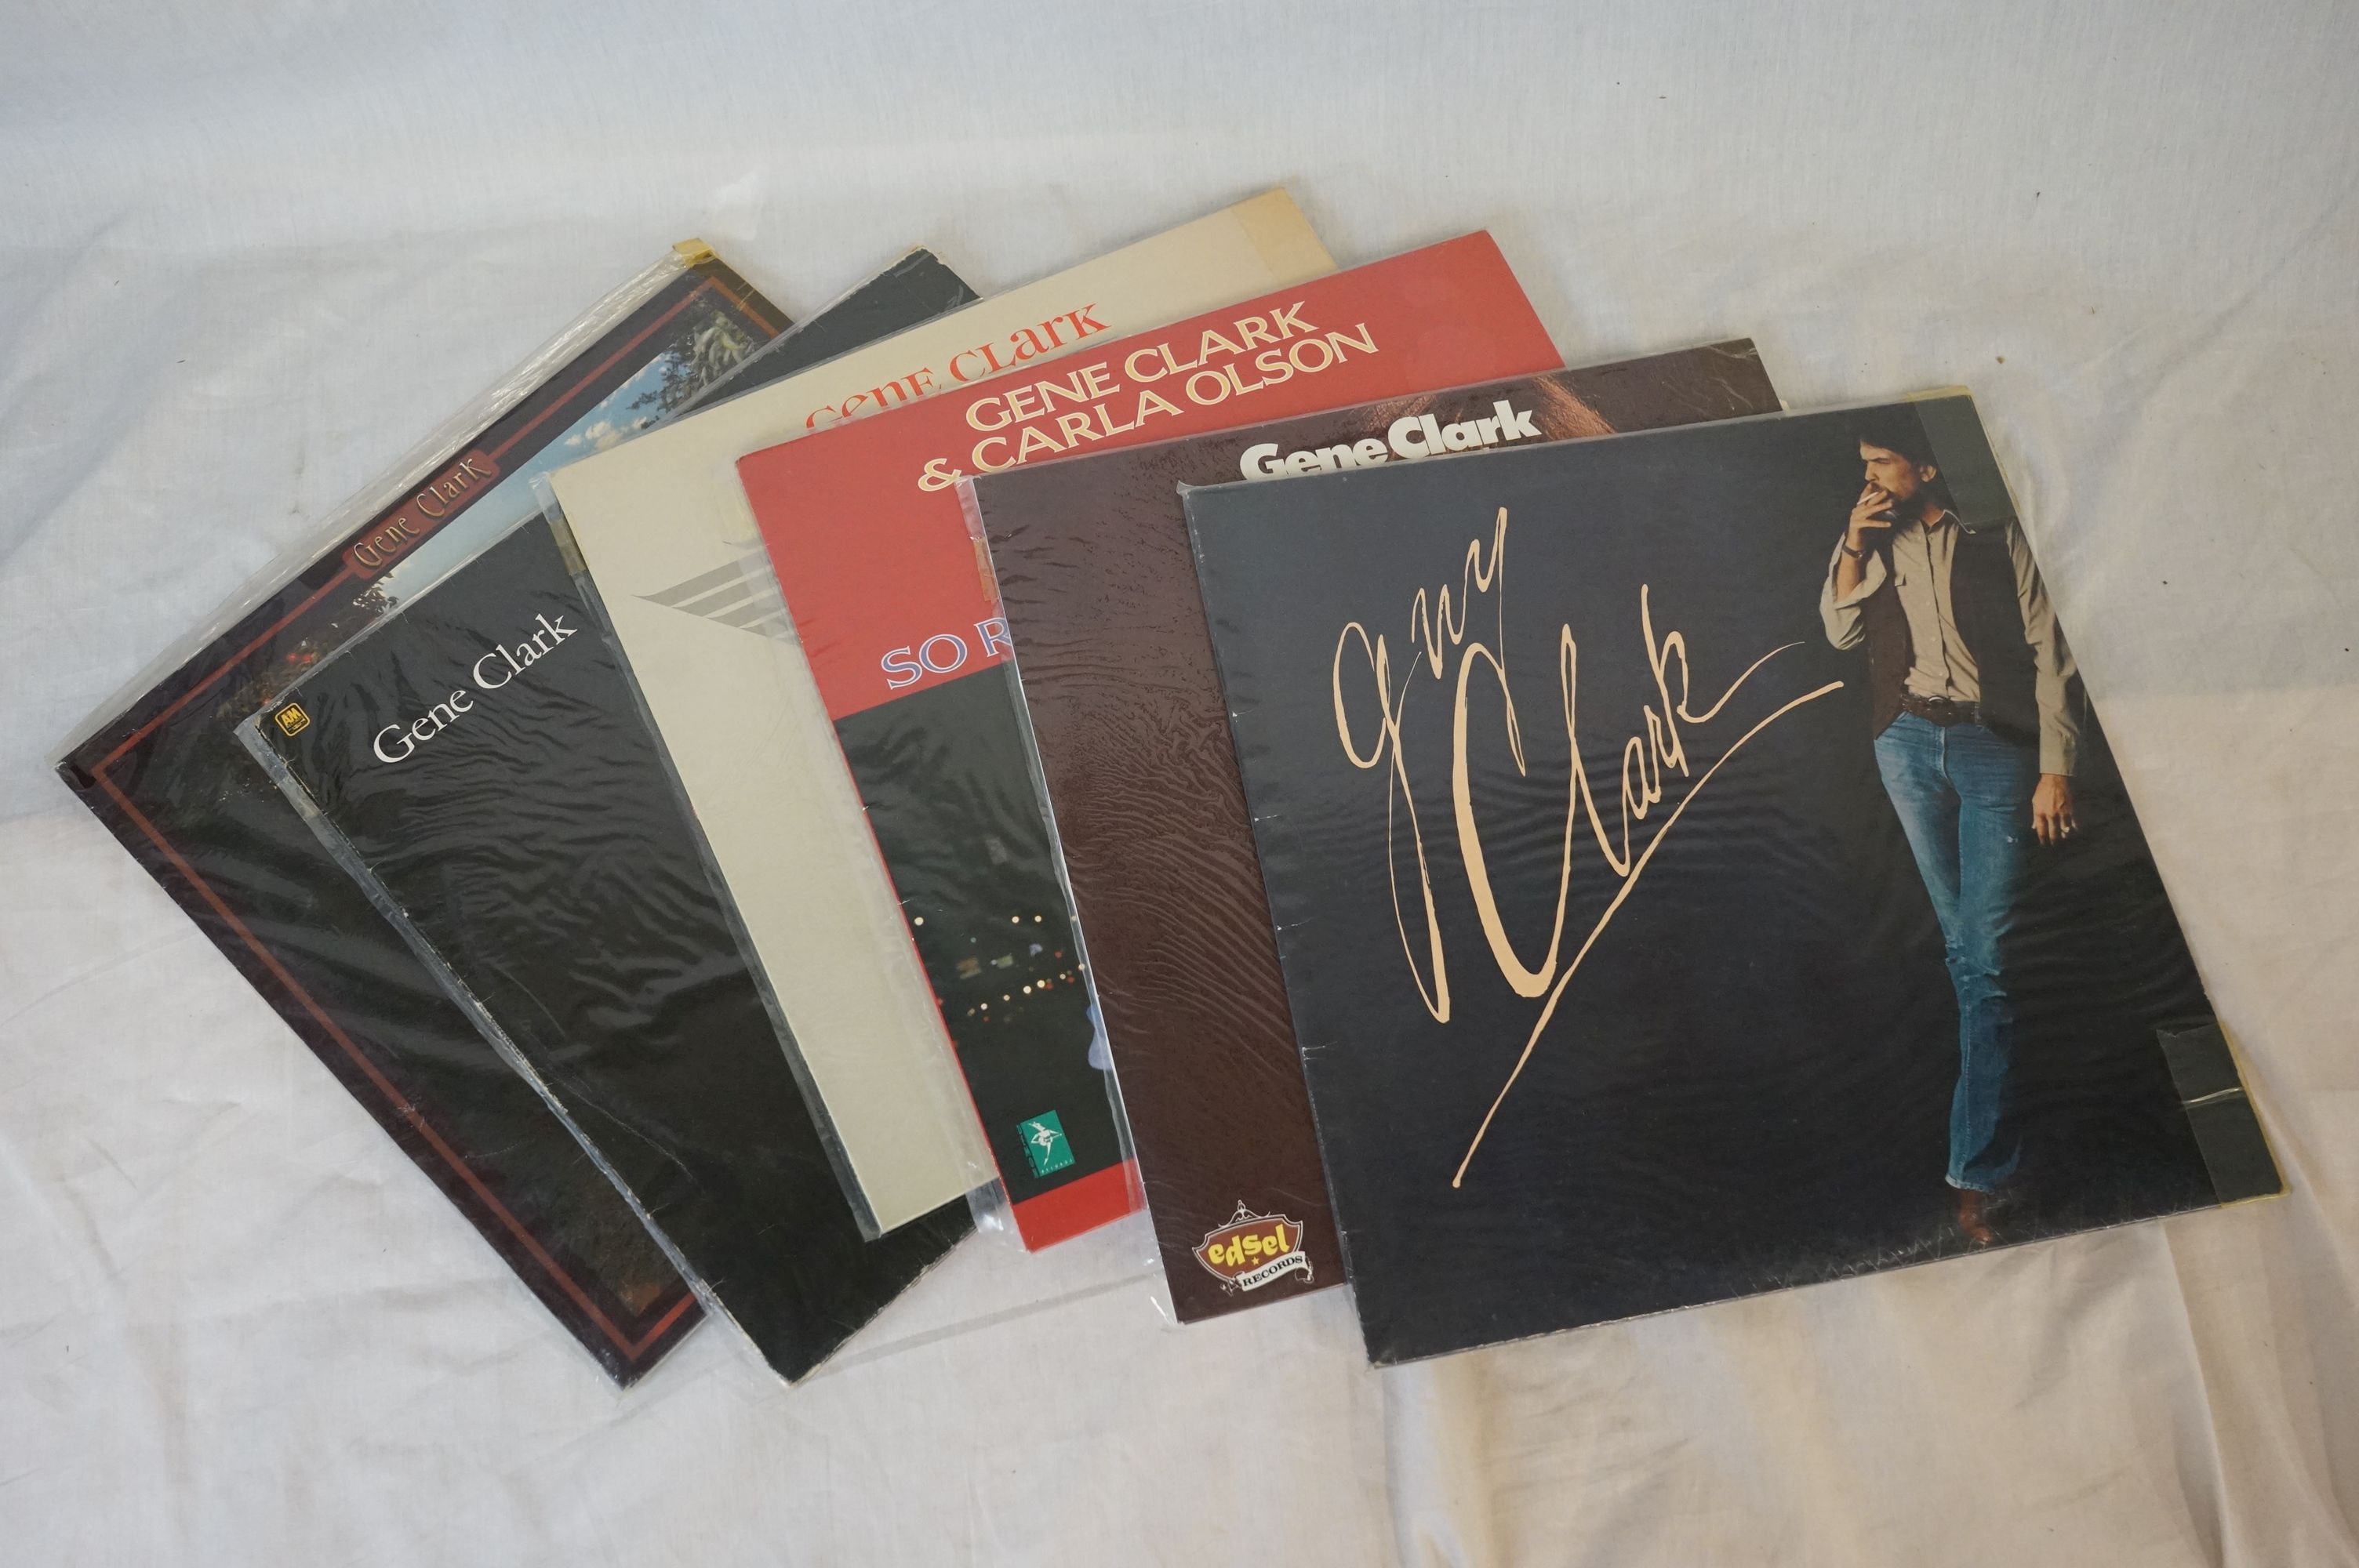 Vinyl - Over 200 LPs to include Country, MOR, Pop etc, sleeves and vinyl vg+ (two boxes) - Image 4 of 4